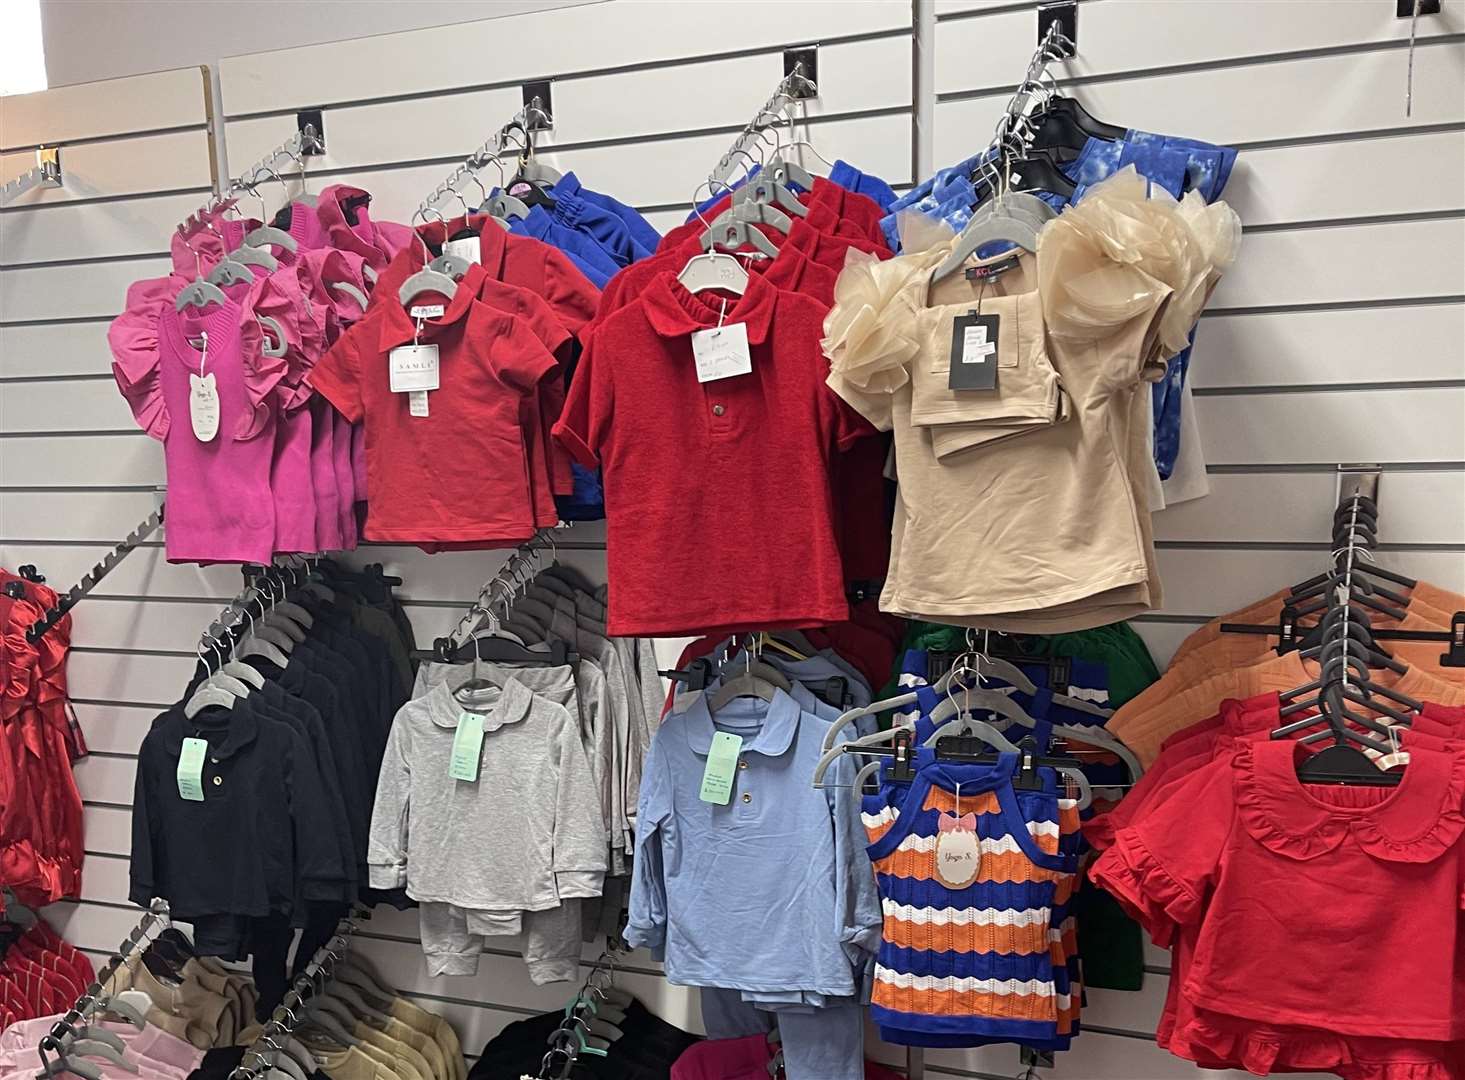 Children's clothing will be sold